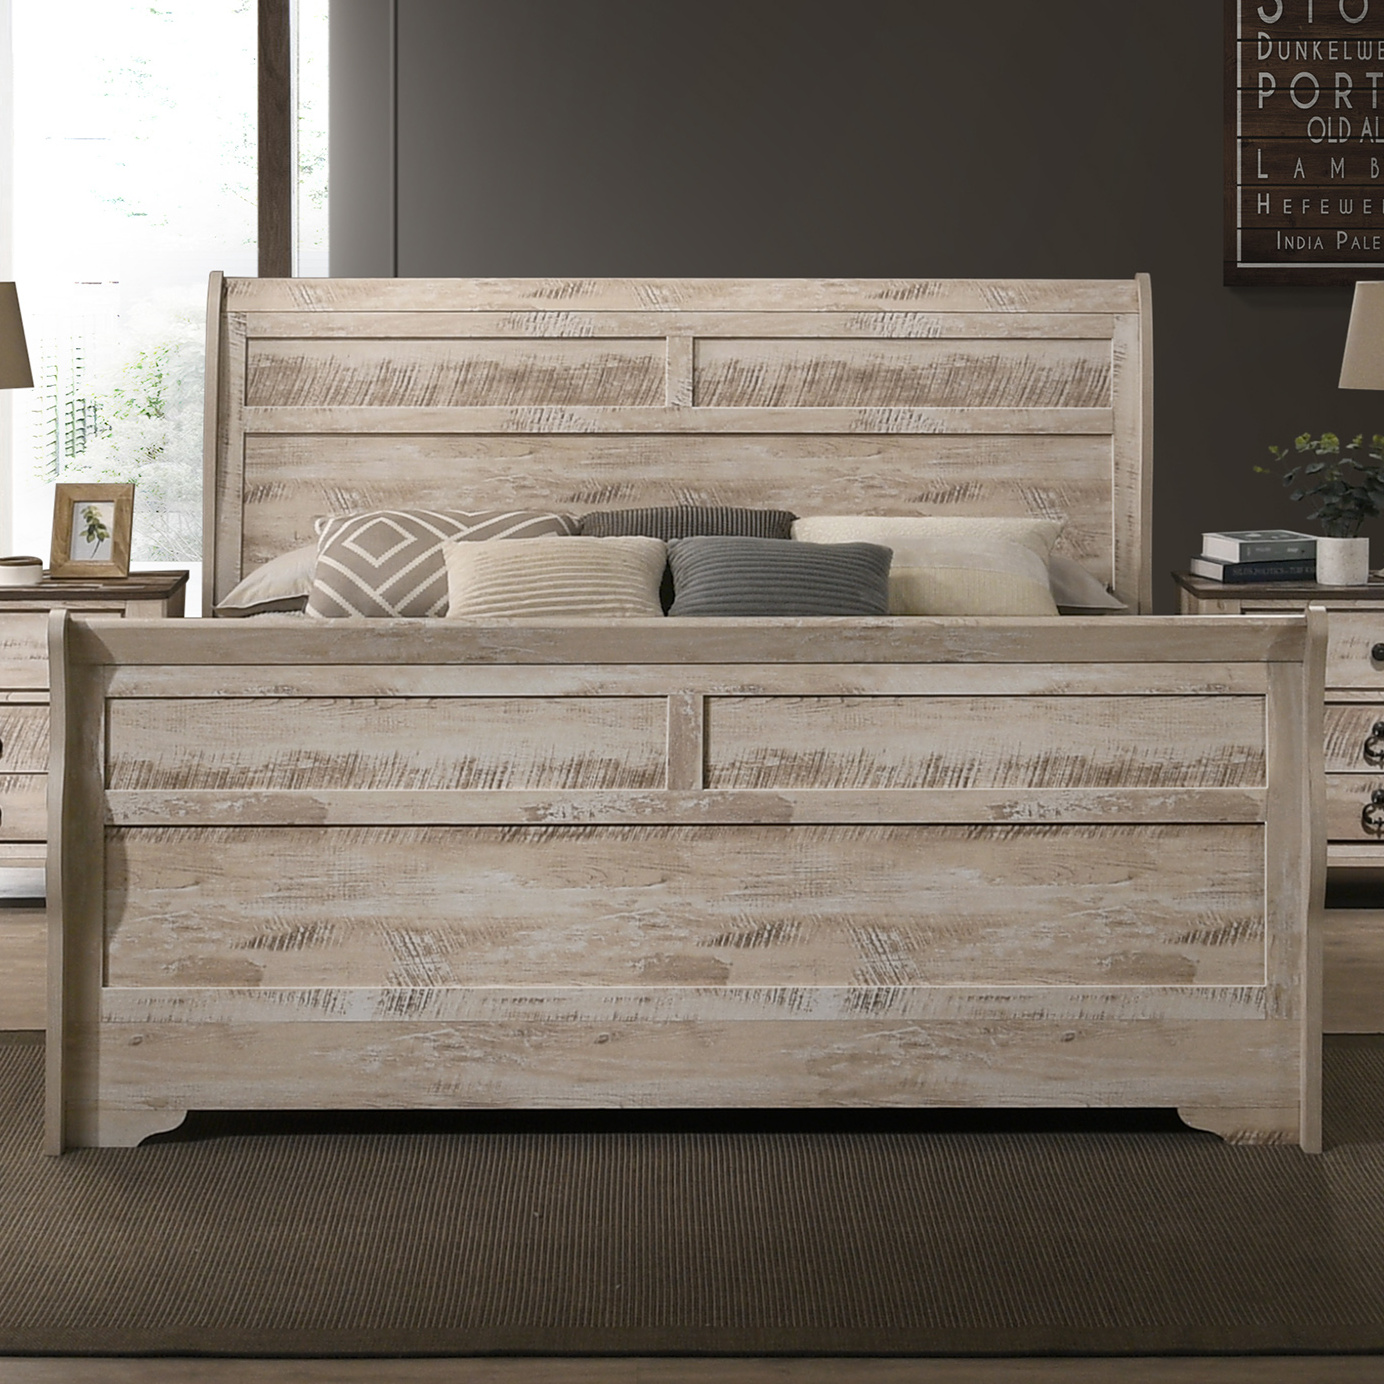 Imerland Contemporary White Wash Finish Bedroom Set with King Sleigh Bed, Dresser, Mirror, Two Nightstands - image 5 of 12